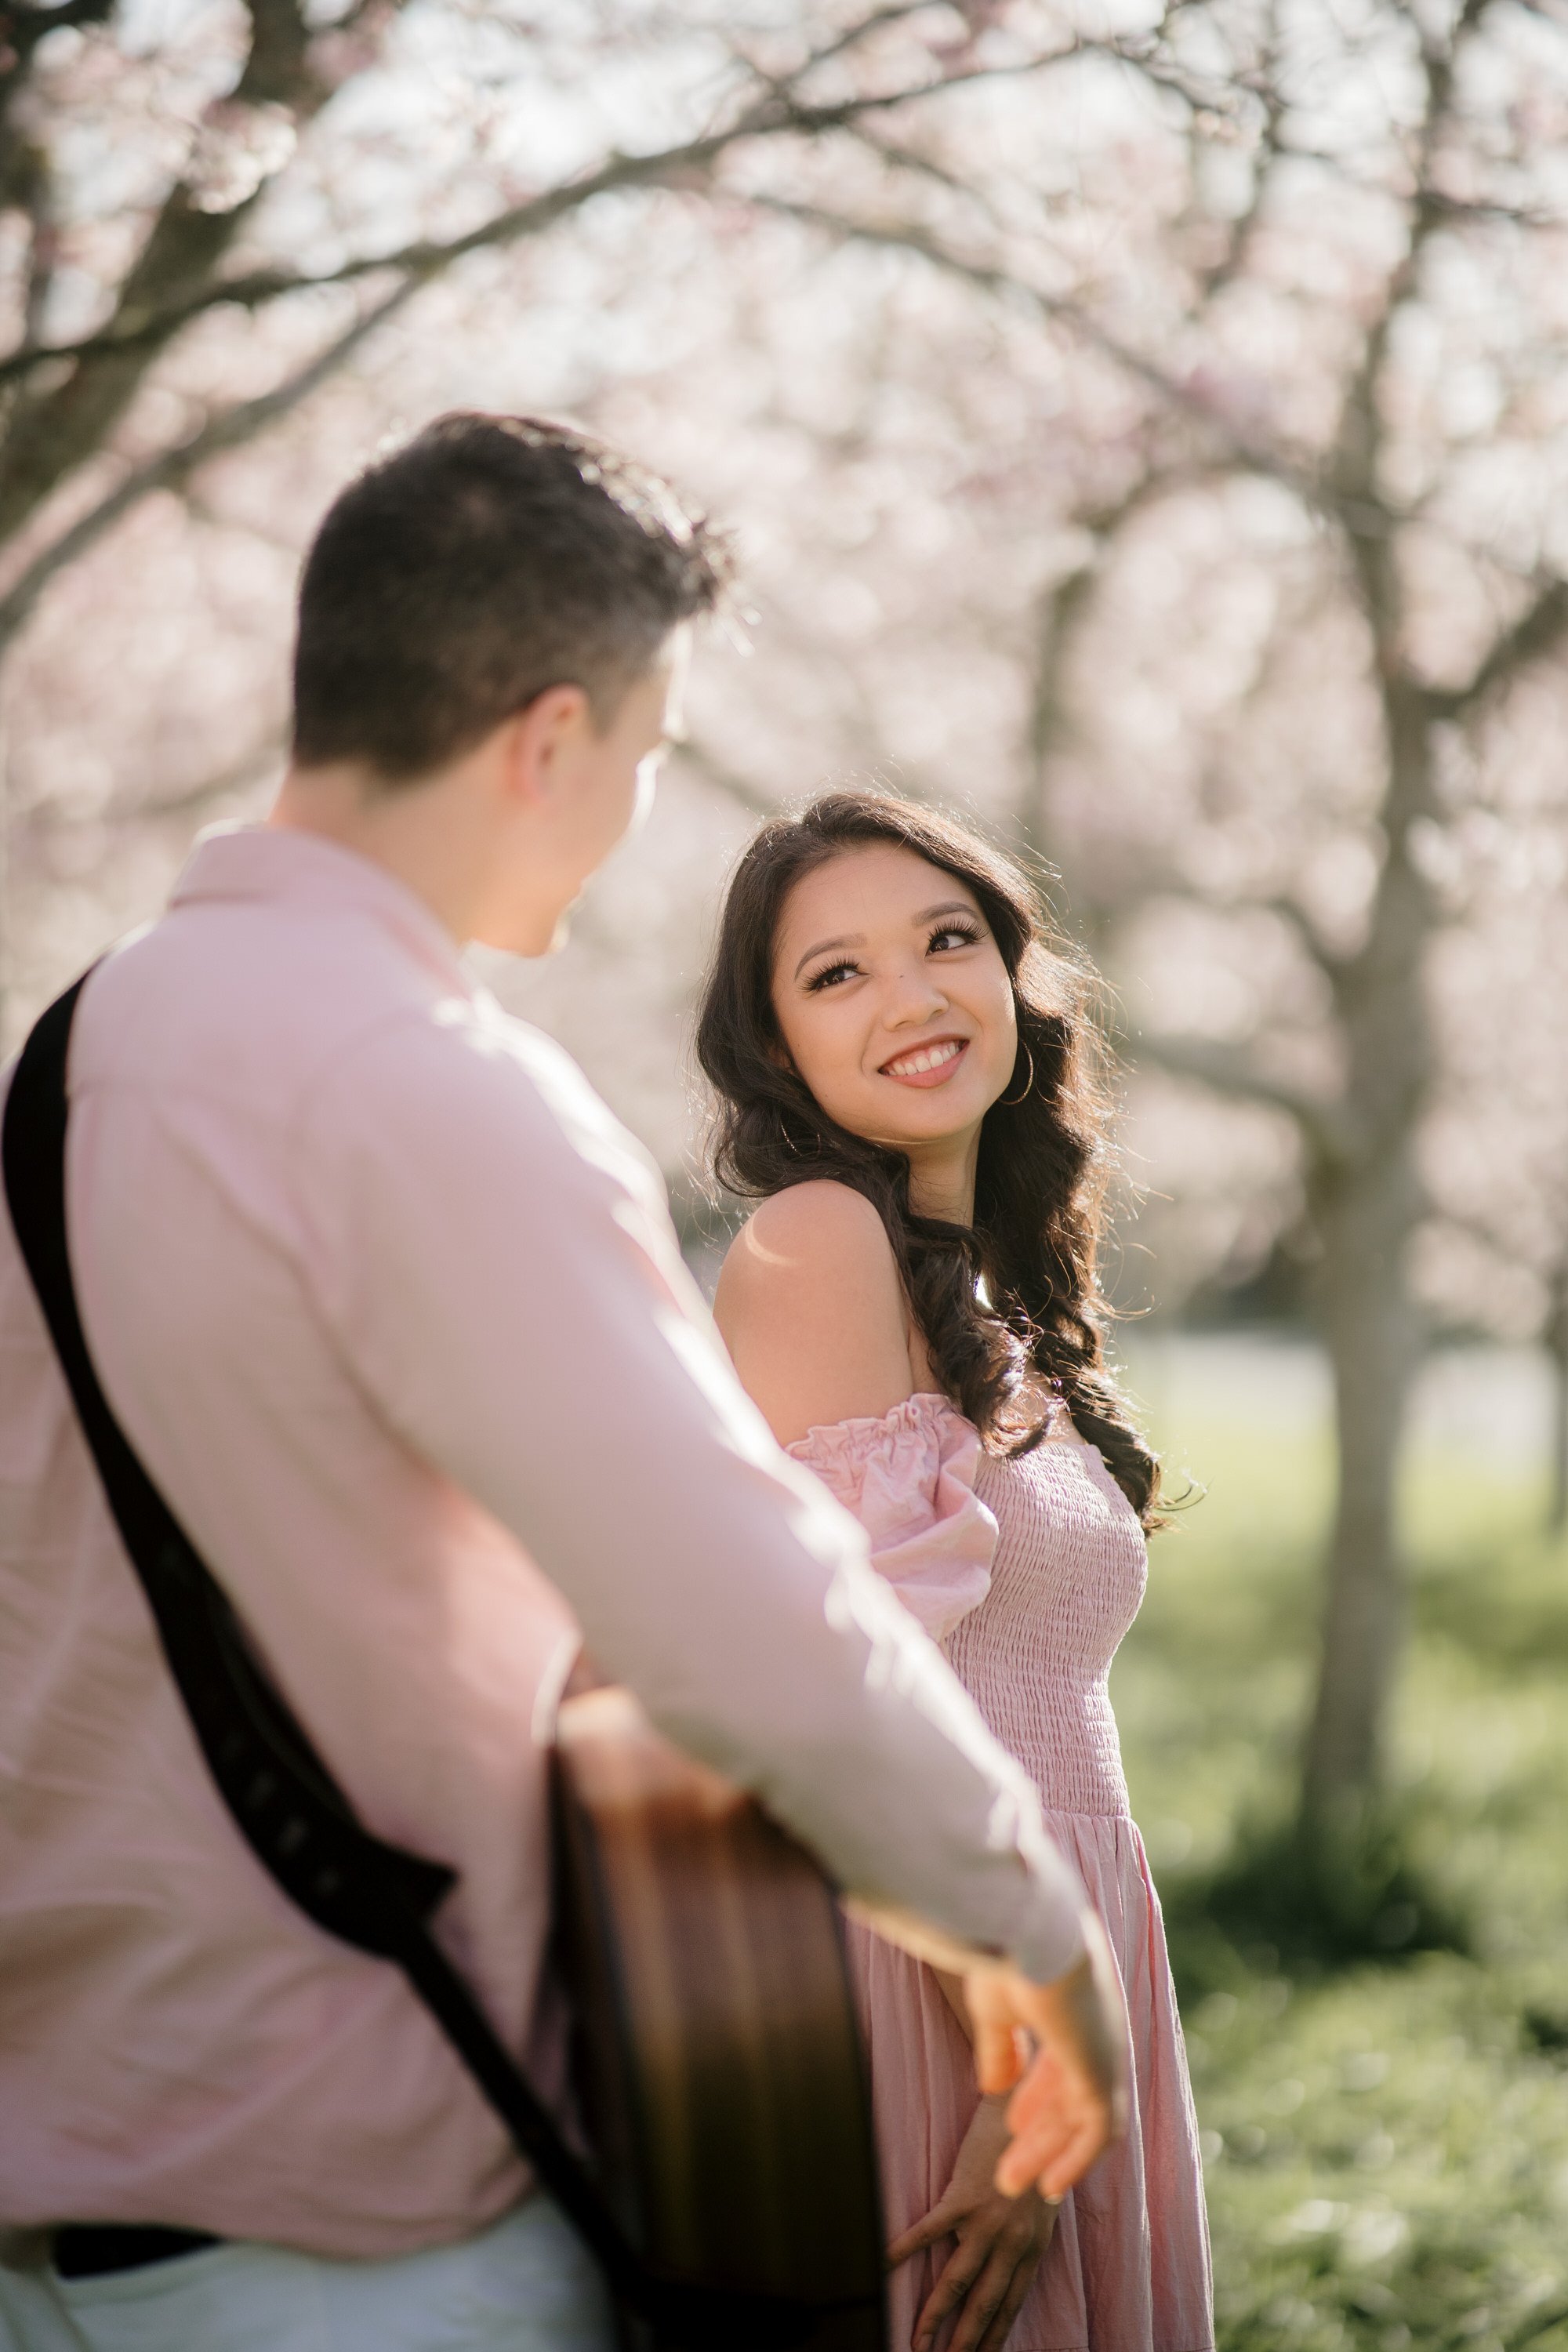 nate-and-thea-singers-duo-2023-top-auckland-wedding-phtographer-photography-videography-film-new-zealand-NZ-best-band-cherry-blossom-botanical-garden-engagement-elopement-dear-white-productions (11).jpg